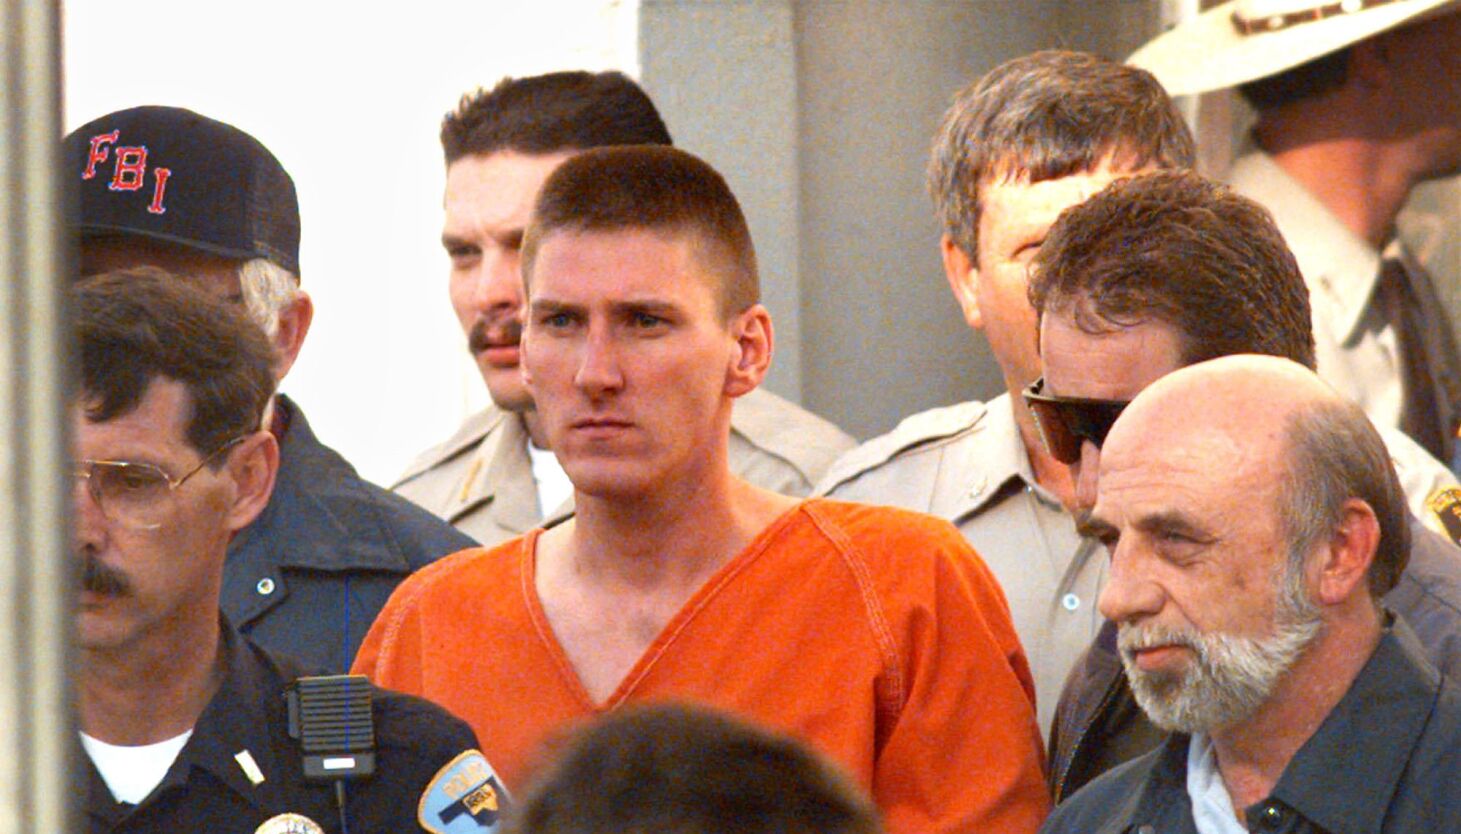 The roots of the poison right can be traced back to Timothy McVeigh